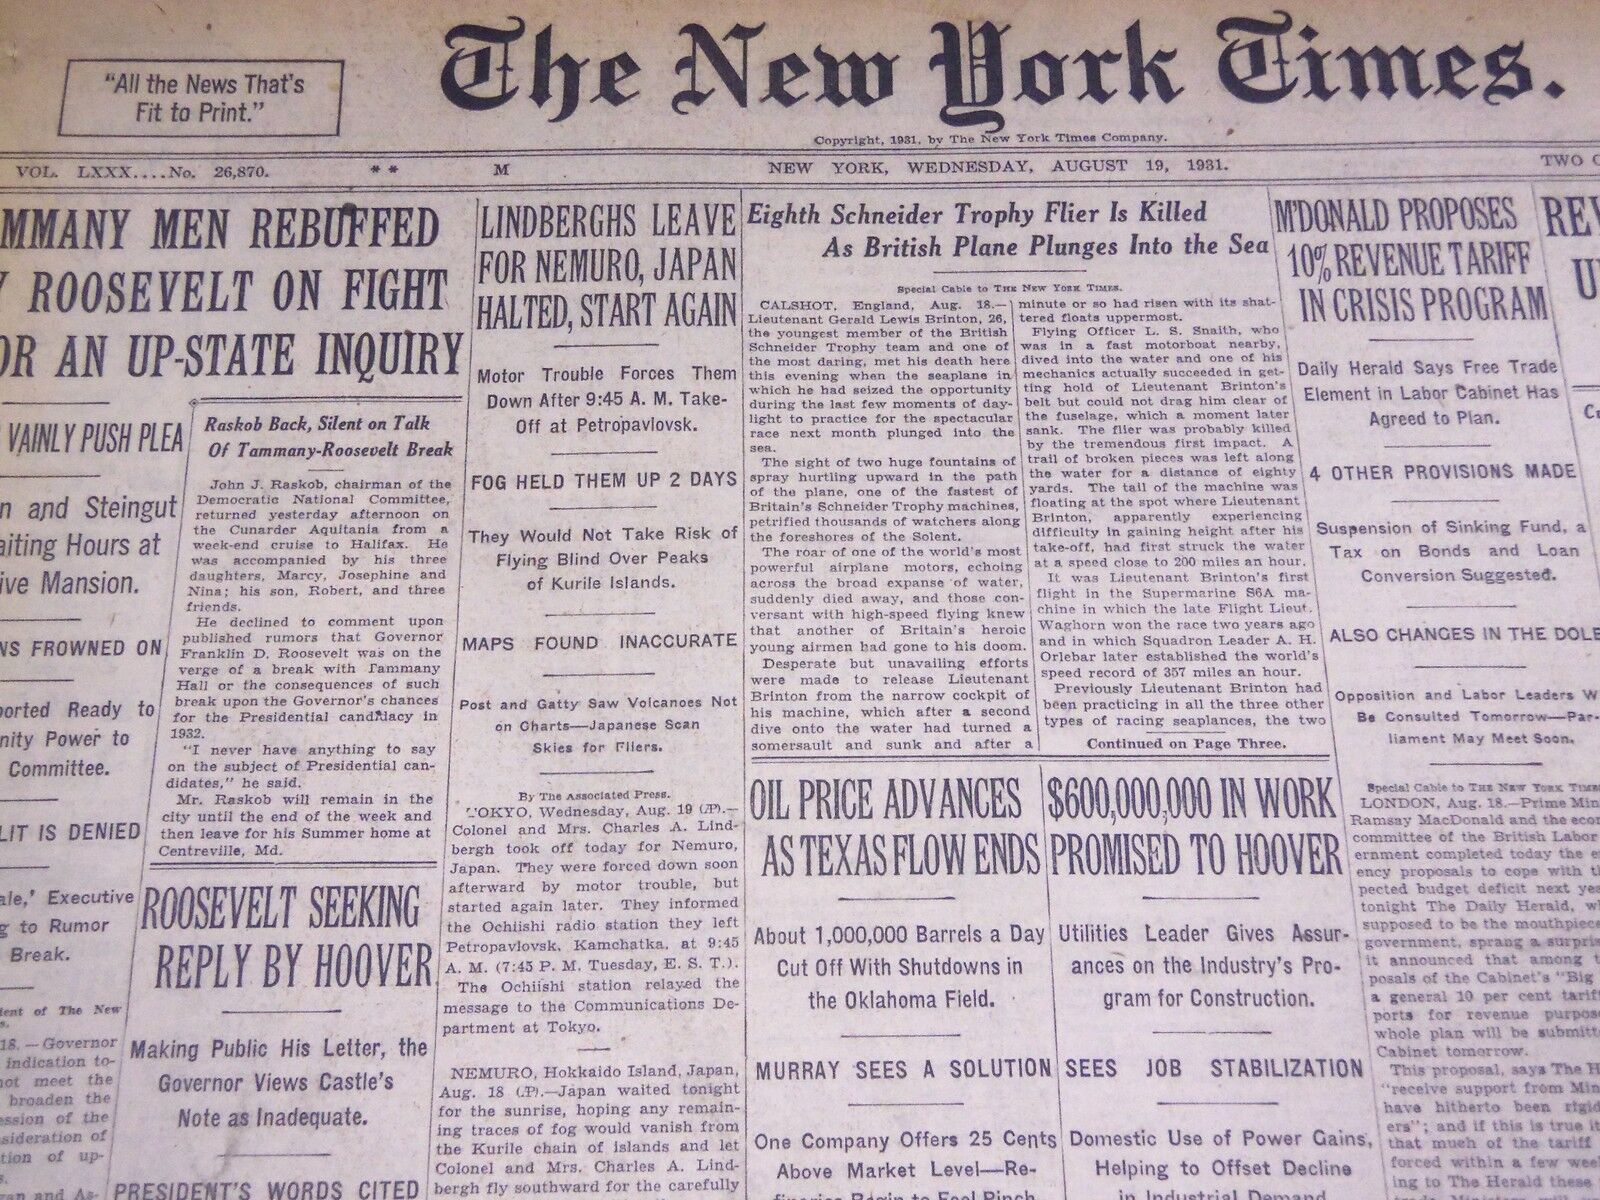 1931 AUGUST 19 NEW YORK TIMES - LINDBERGH\'S LEAVE FOR NEMURO JAPAN - NT 2450